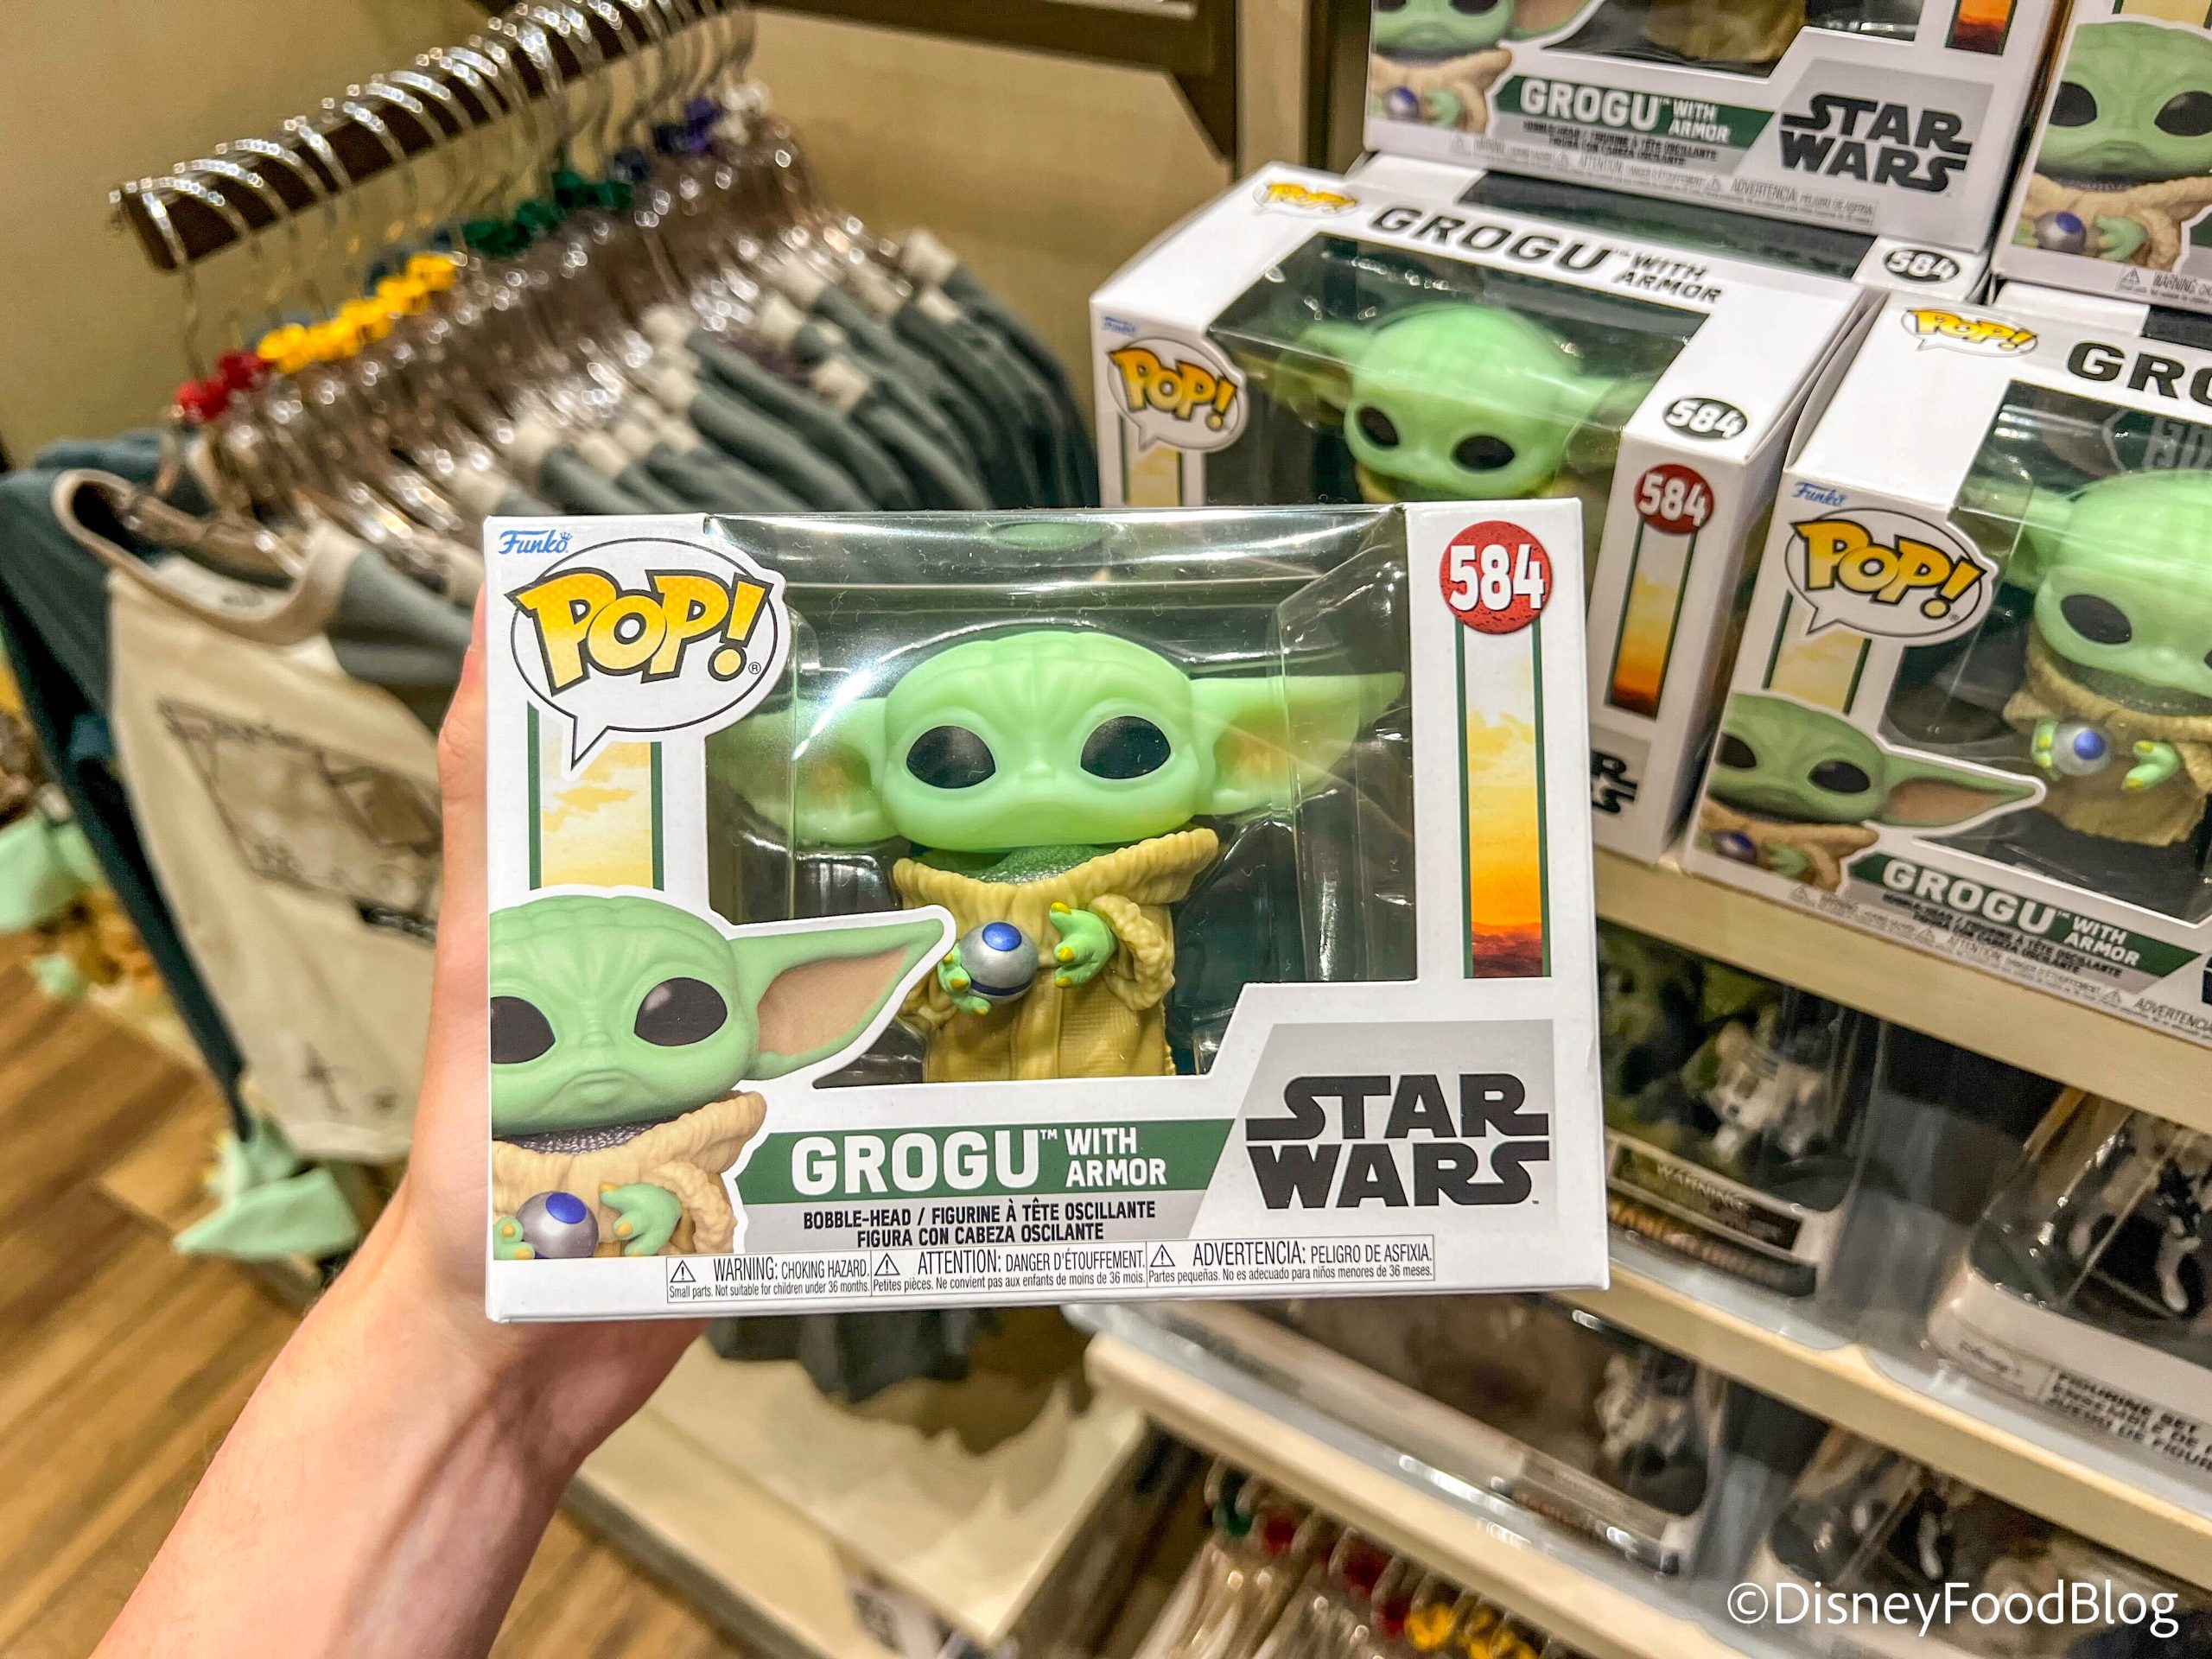 NEWS: Millions of Funko POP!s Could Be Headed For Landfill